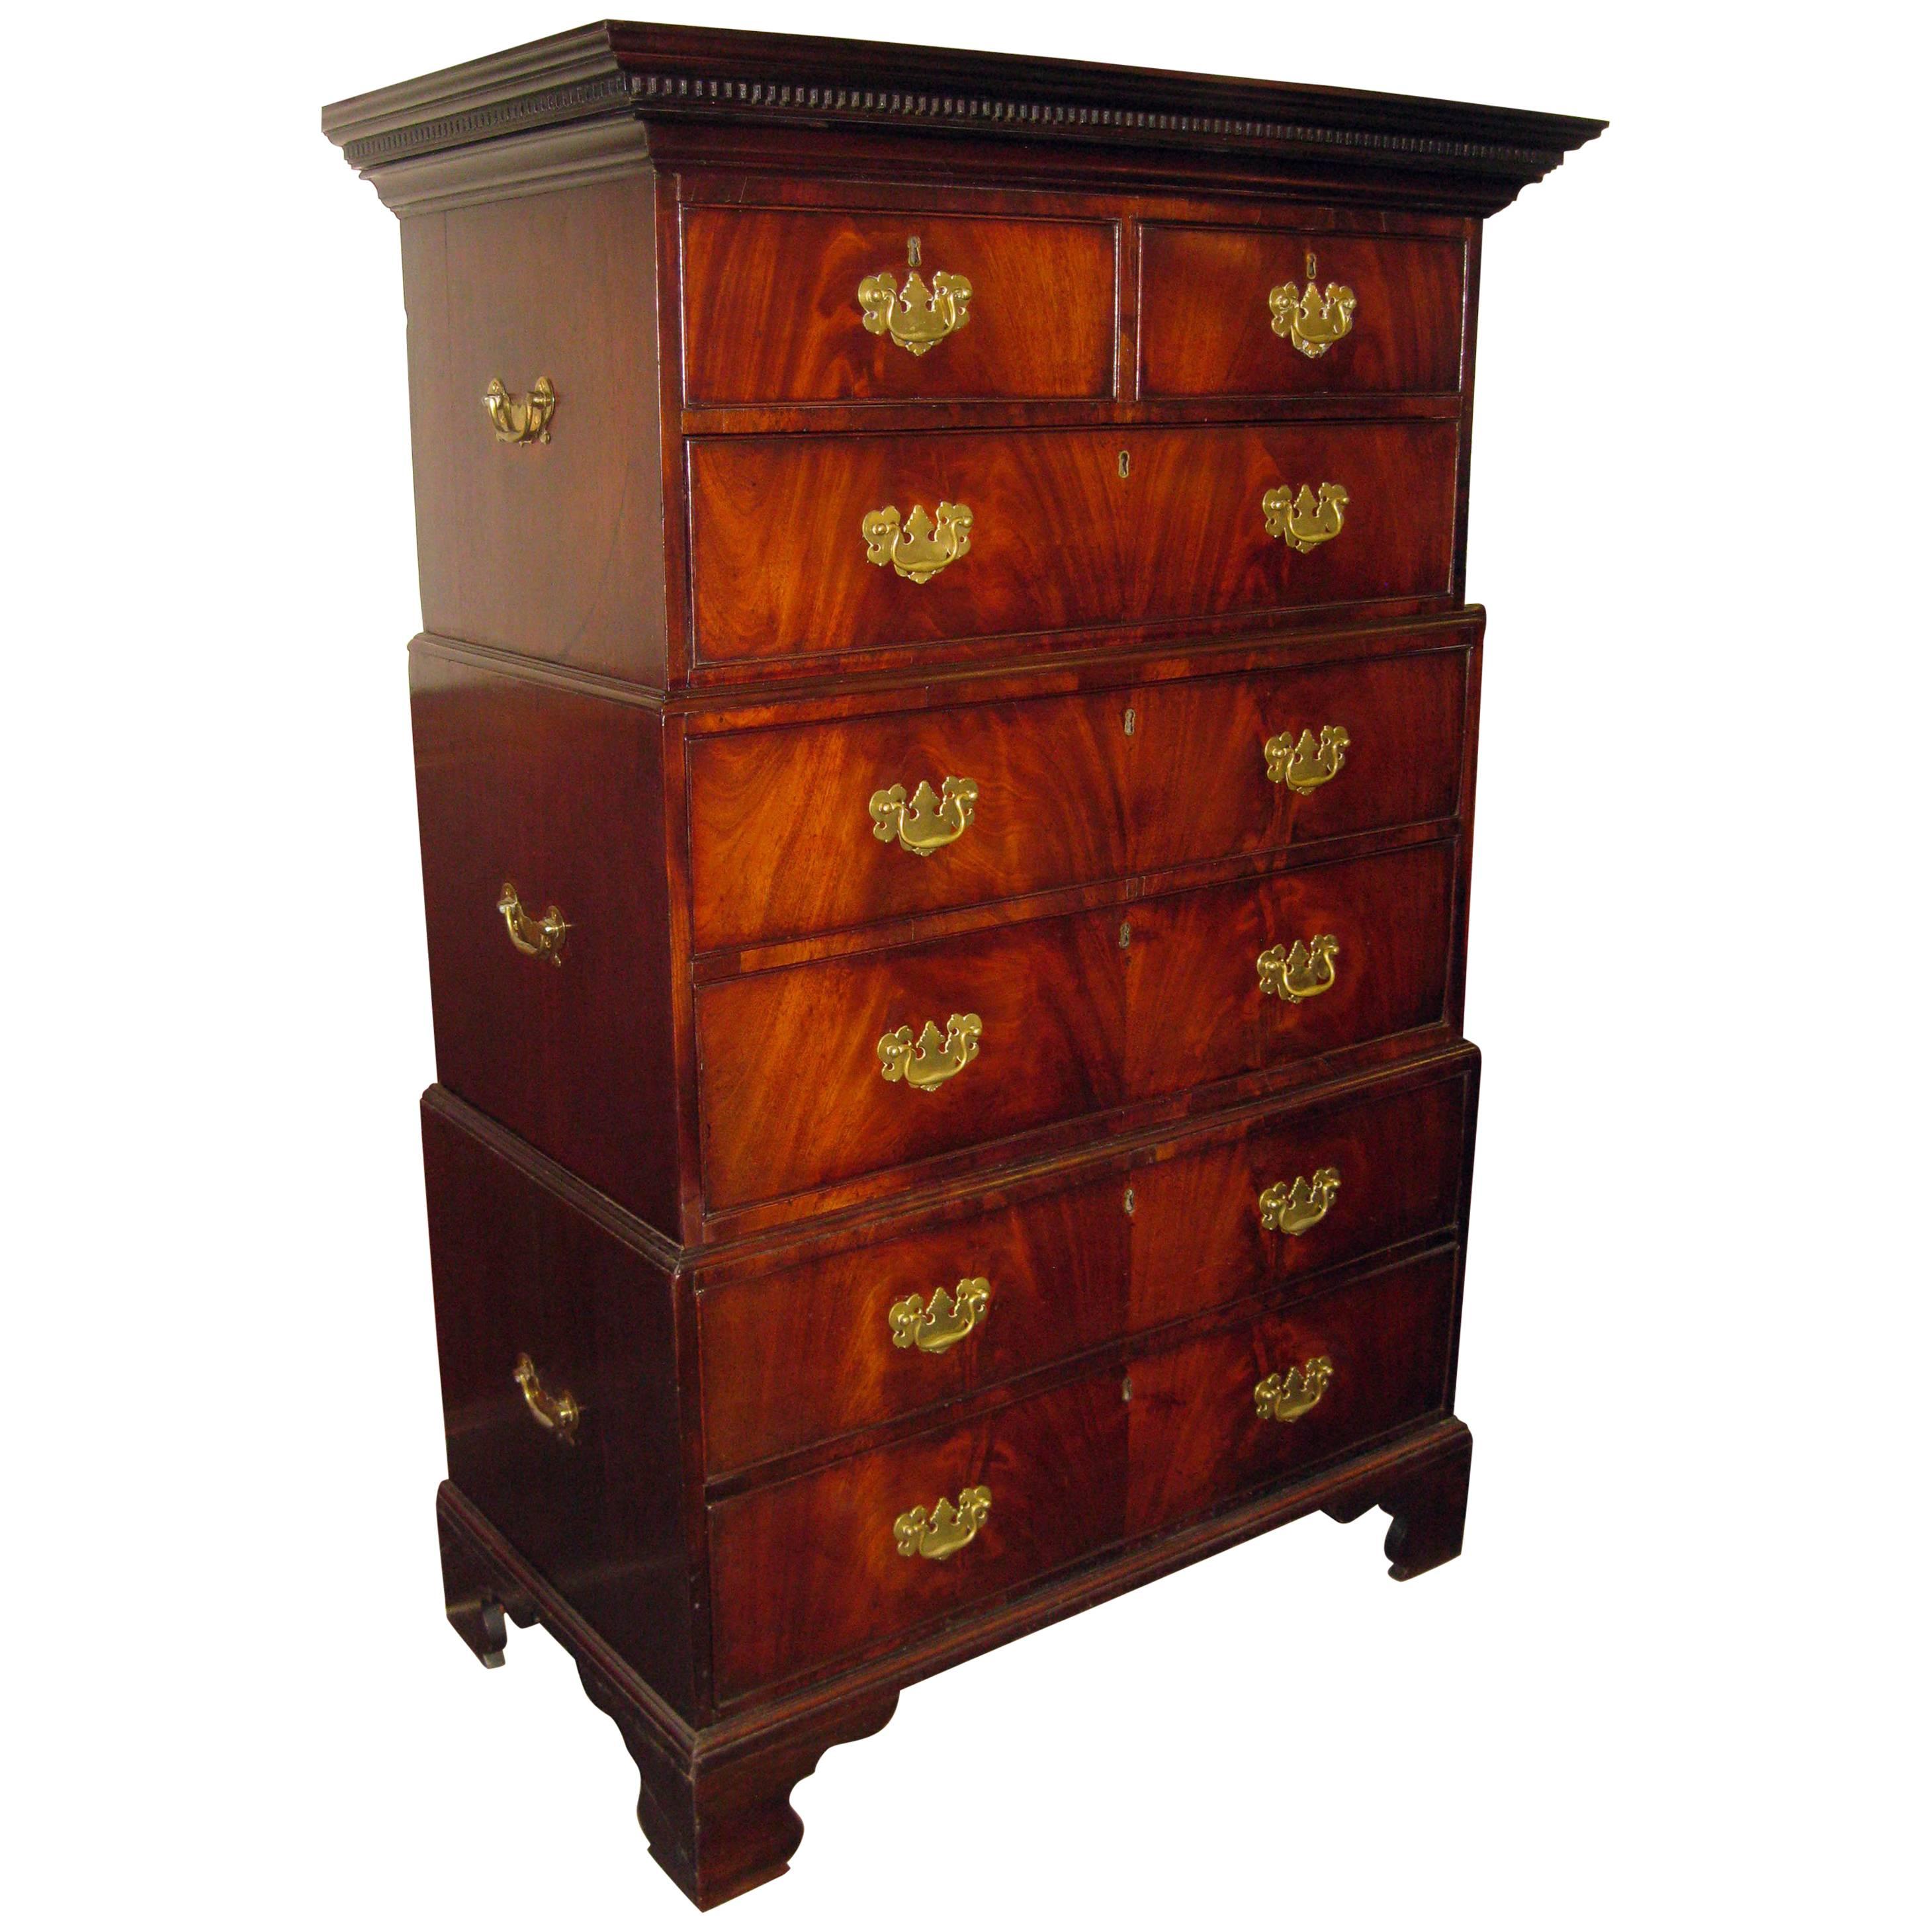 18th century English Mahogany Triple Chest on Chest Large Size